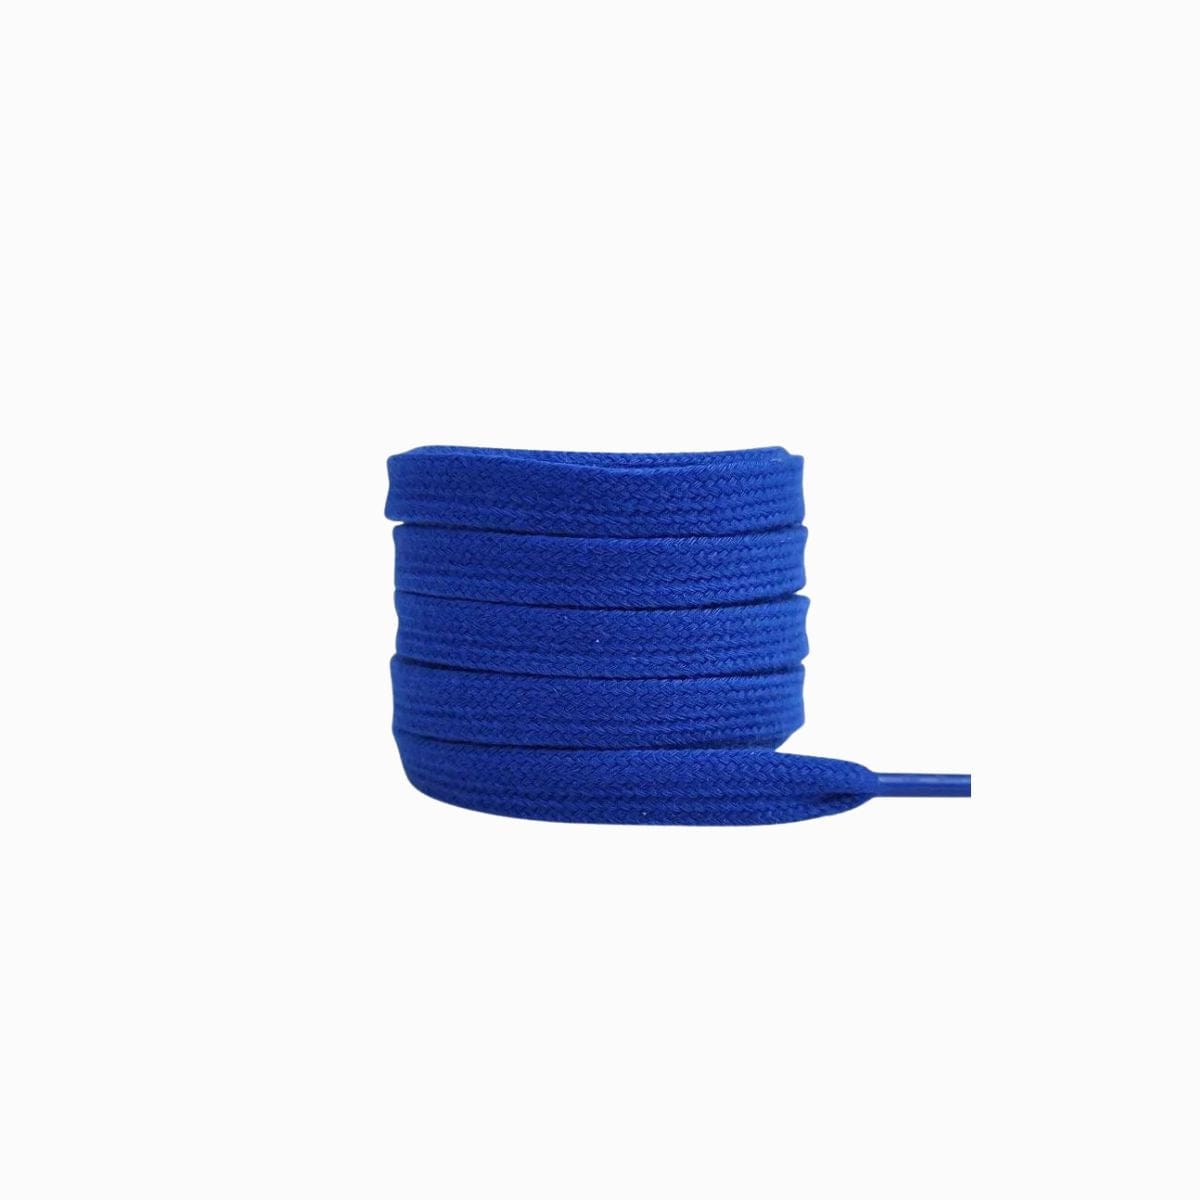 Royal Blue Replacement Adidas Shoe Laces for Adidas Gazelle Sneakers by Kicks Shoelaces